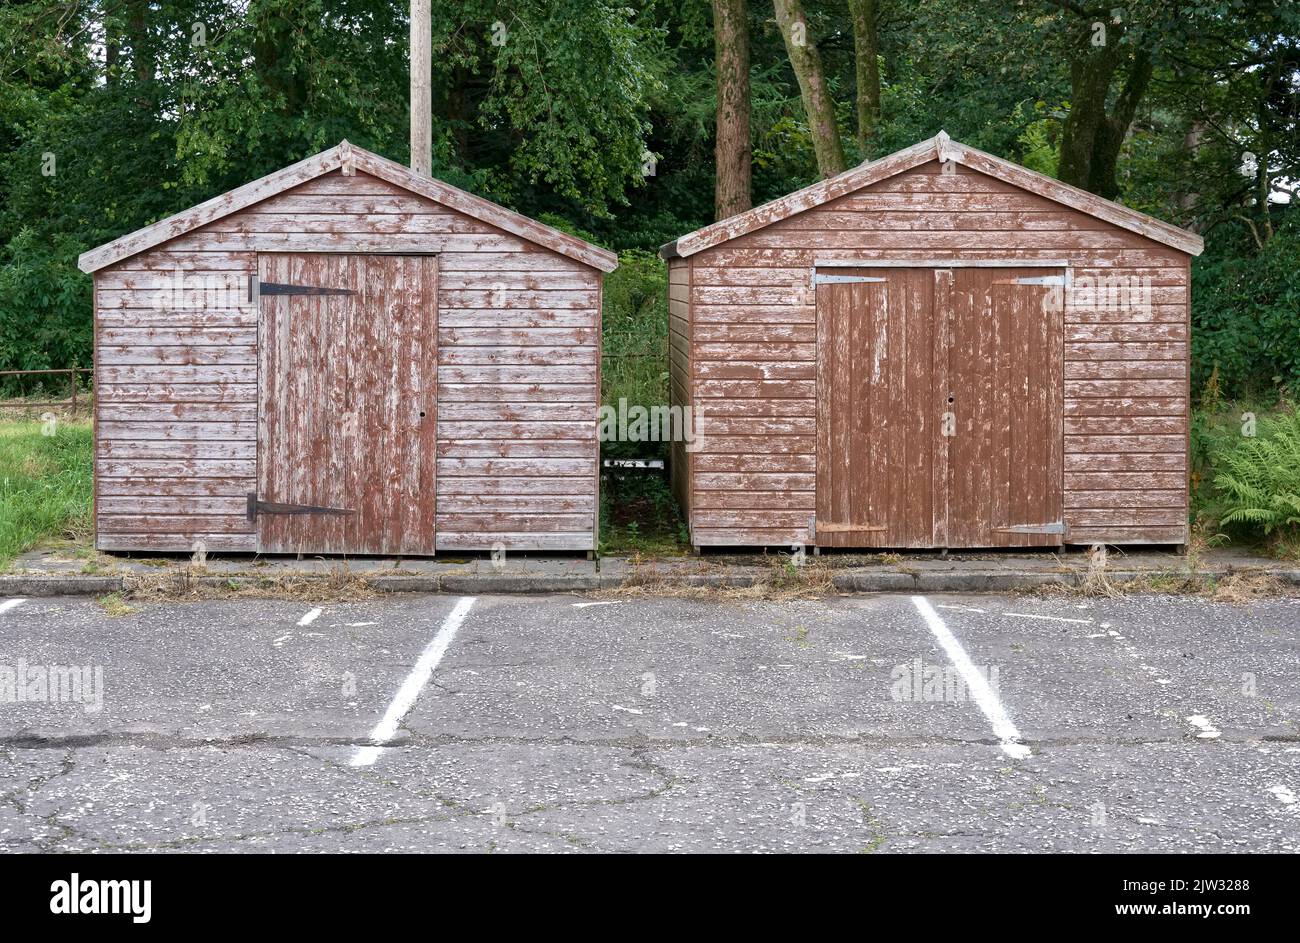 Brown wood sheds in rural countryside car park Stock Photo